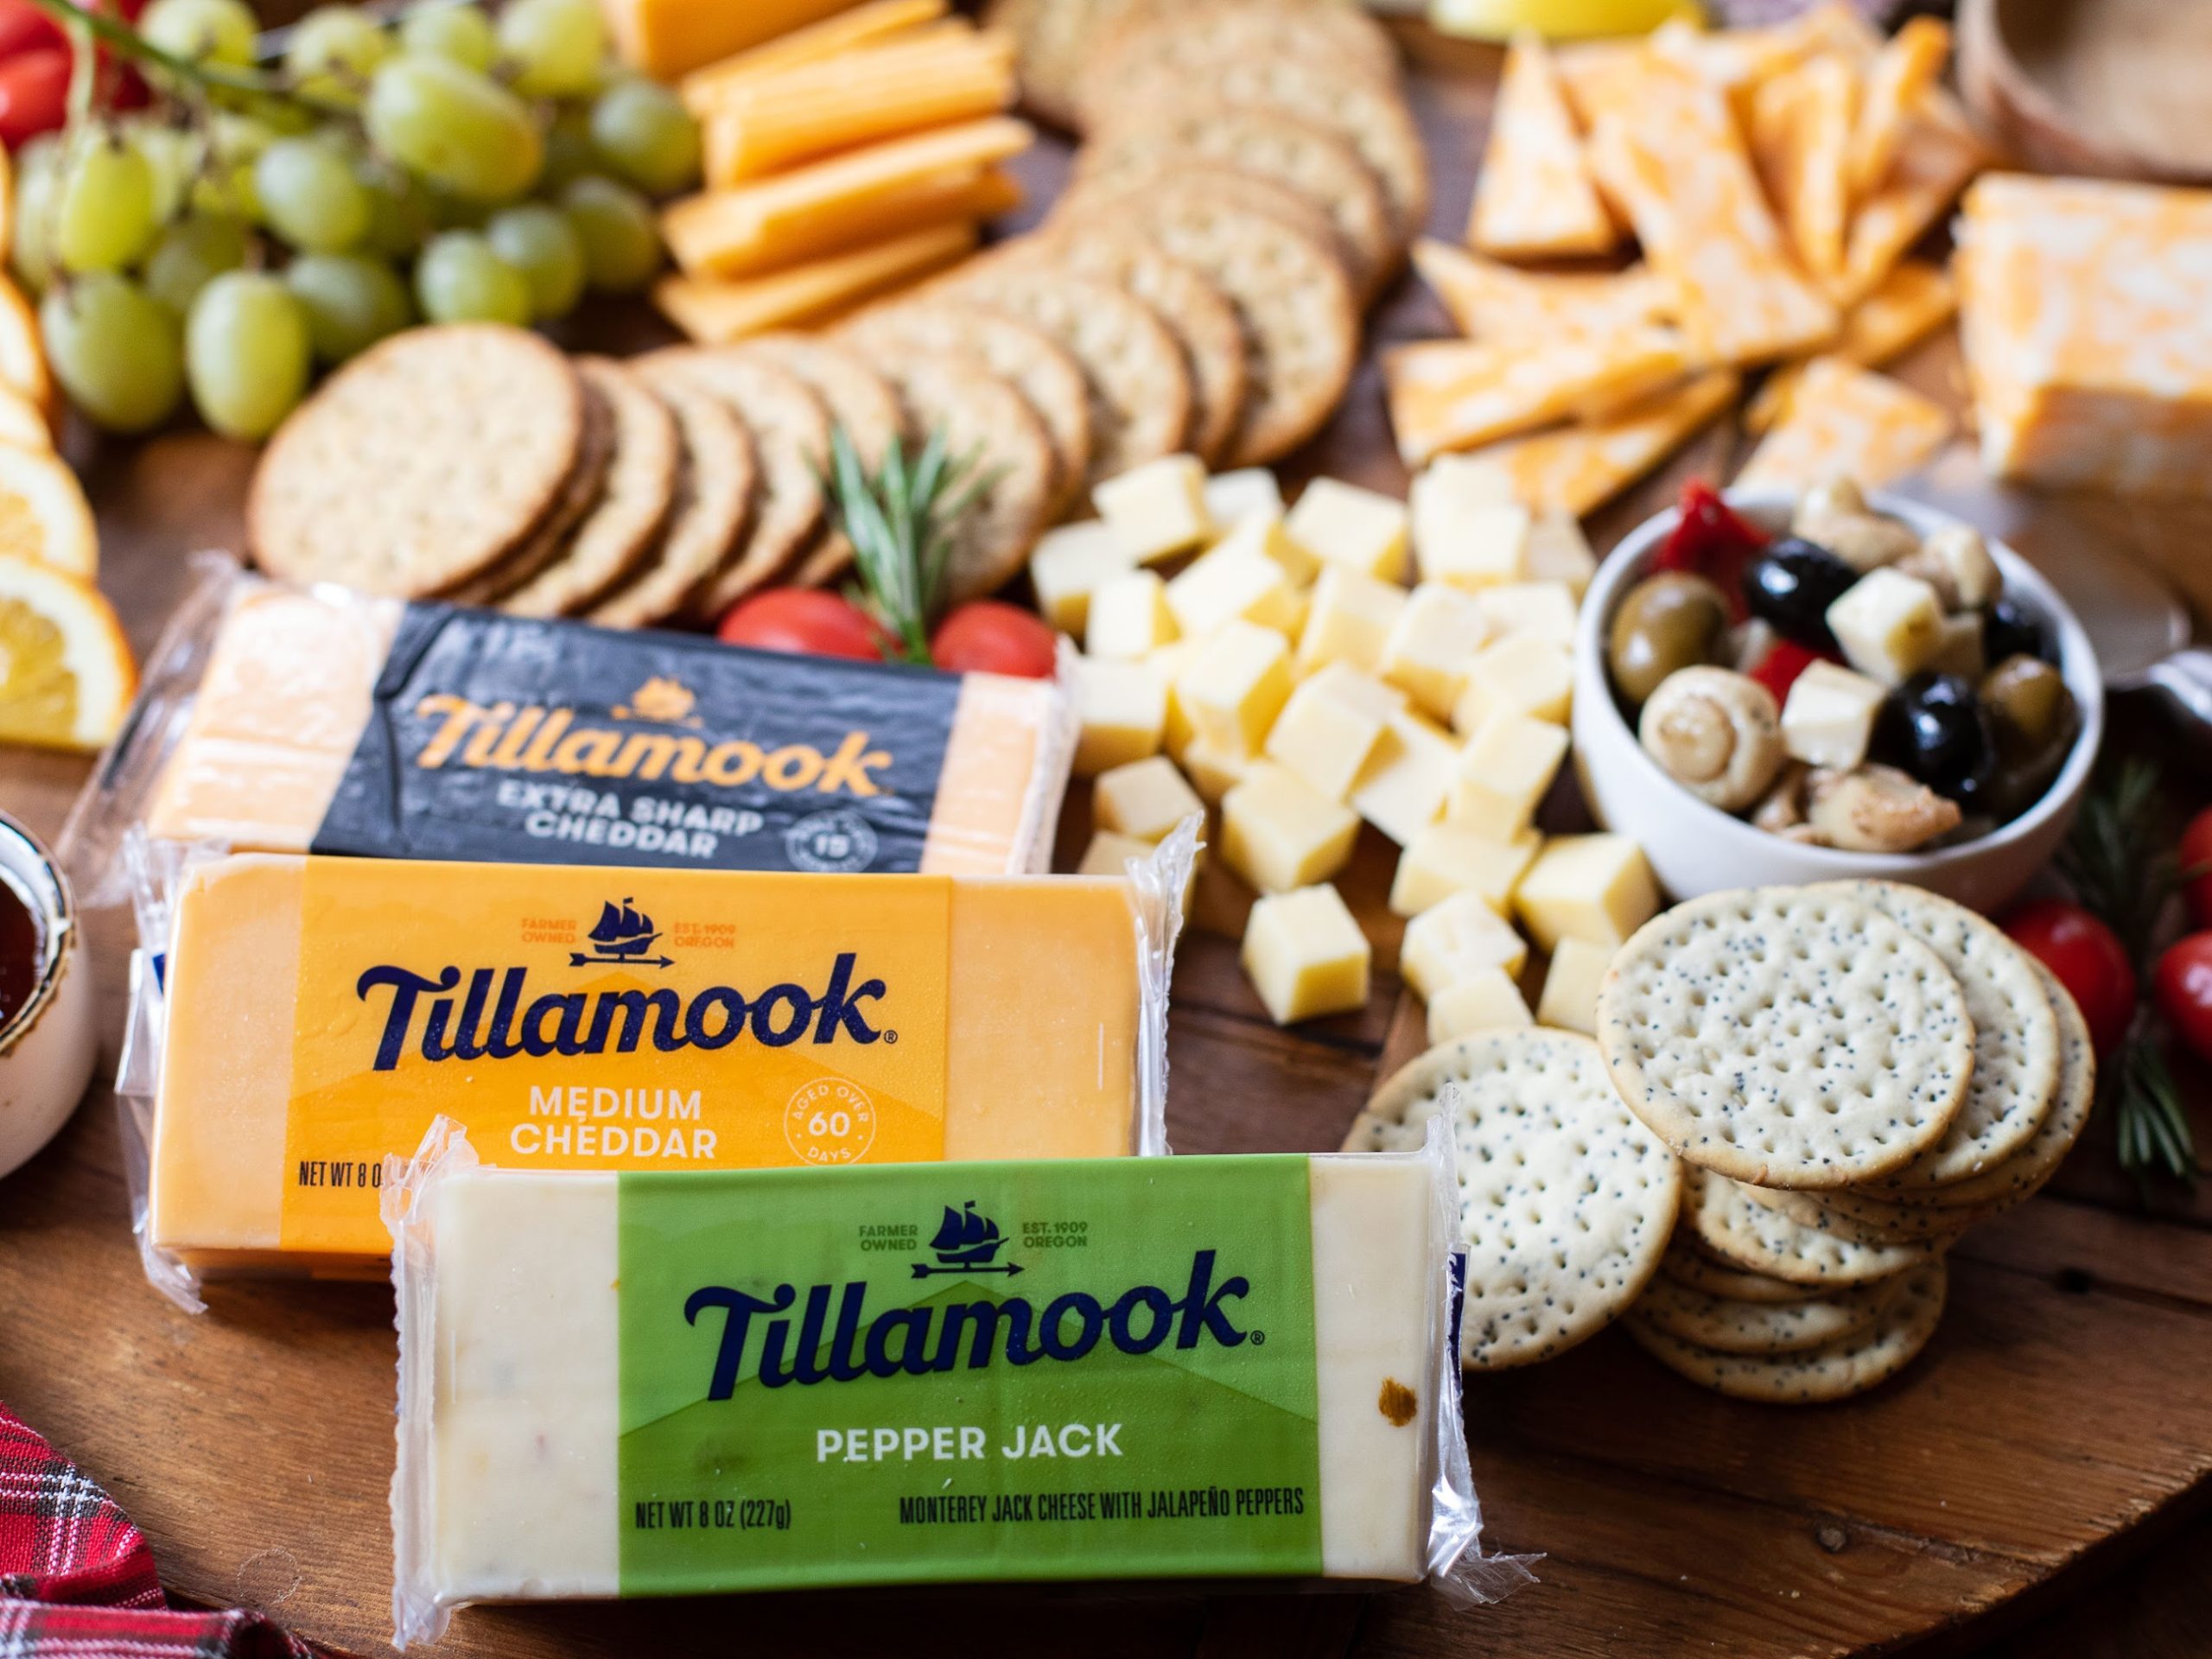 Stock Up On Your Favorite Tillamook Products And Get Holiday Essentials PLUS Earn A Publix Gift Card! on I Heart Publix